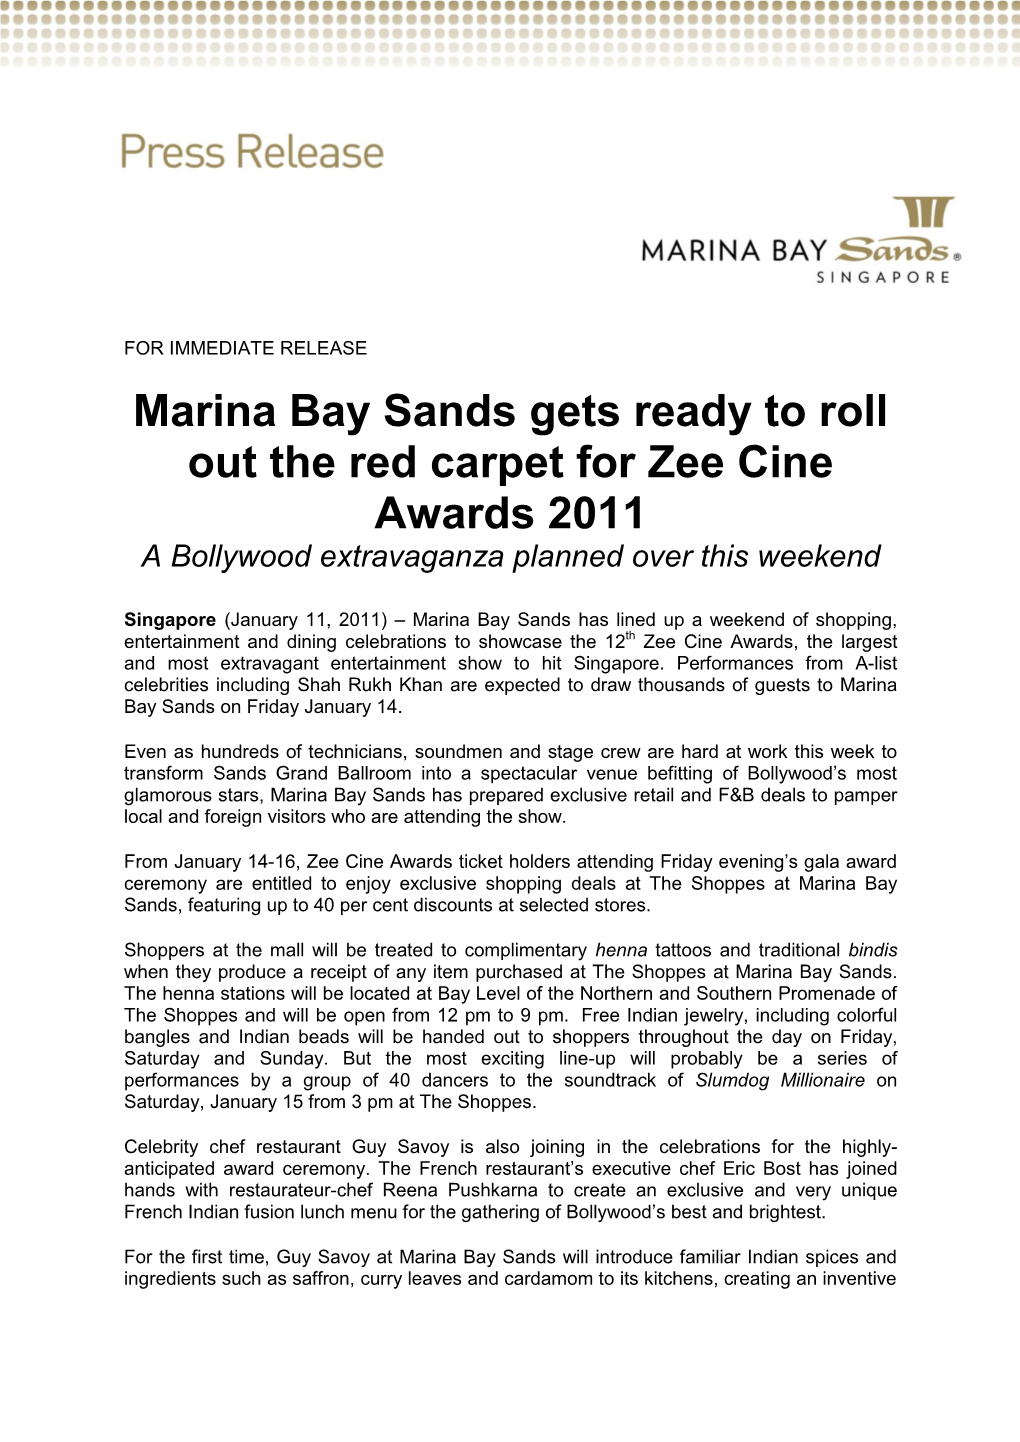 Marina Bay Sands Gets Ready to Roll out the Red Carpet for Zee Cine Awards 2011 a Bollywood Extravaganza Planned Over This Weekend